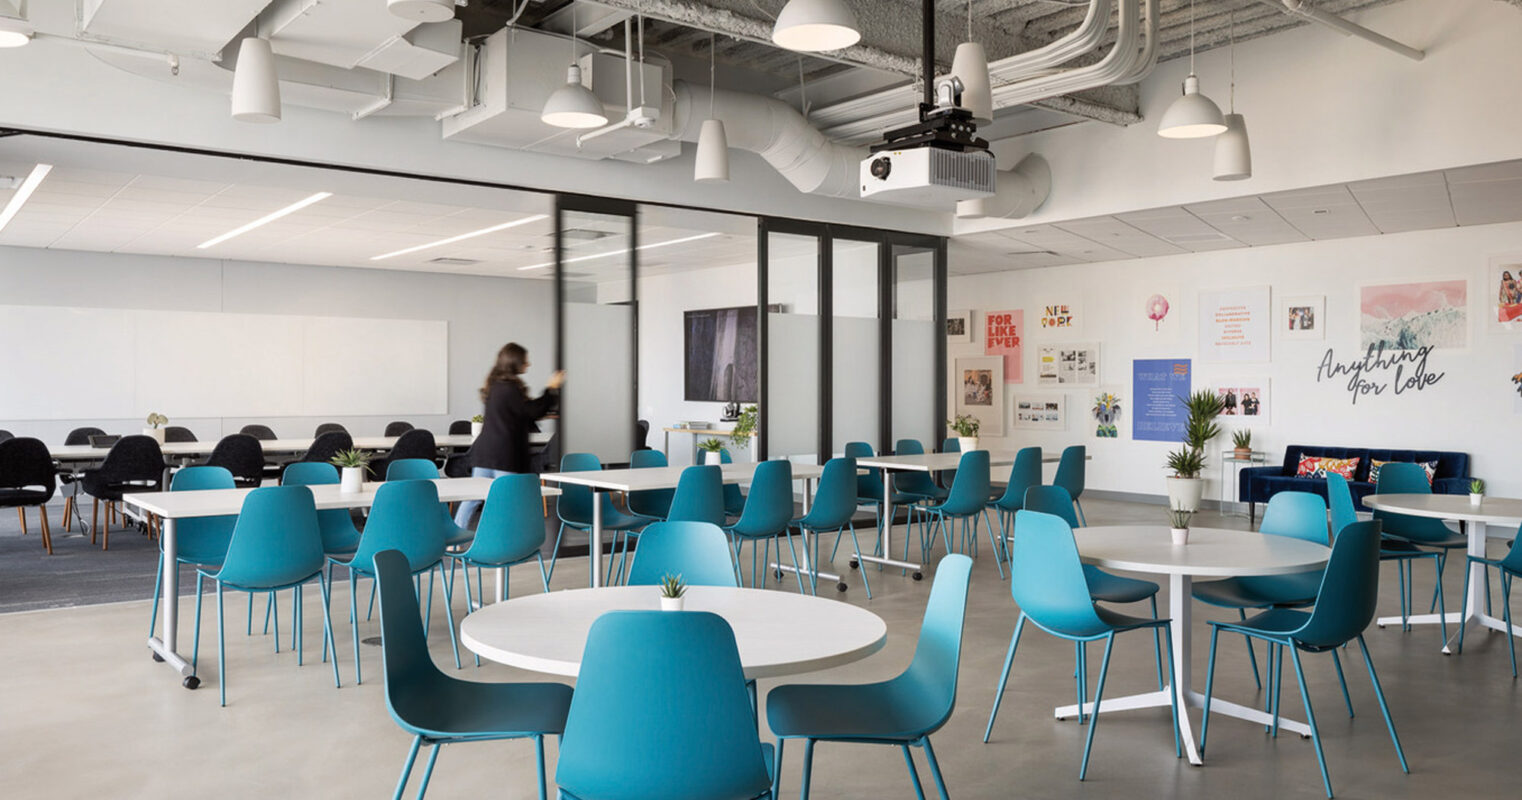 A modern office break room featuring exposed concrete ceilings with industrial pendant lighting. Turquoise chairs surround white, minimalist tables, creating a vibrant contrast against the neutral floor. Glass partitions delineate a meeting area, while motivational posters adorn the walls, promoting a creative work environment.